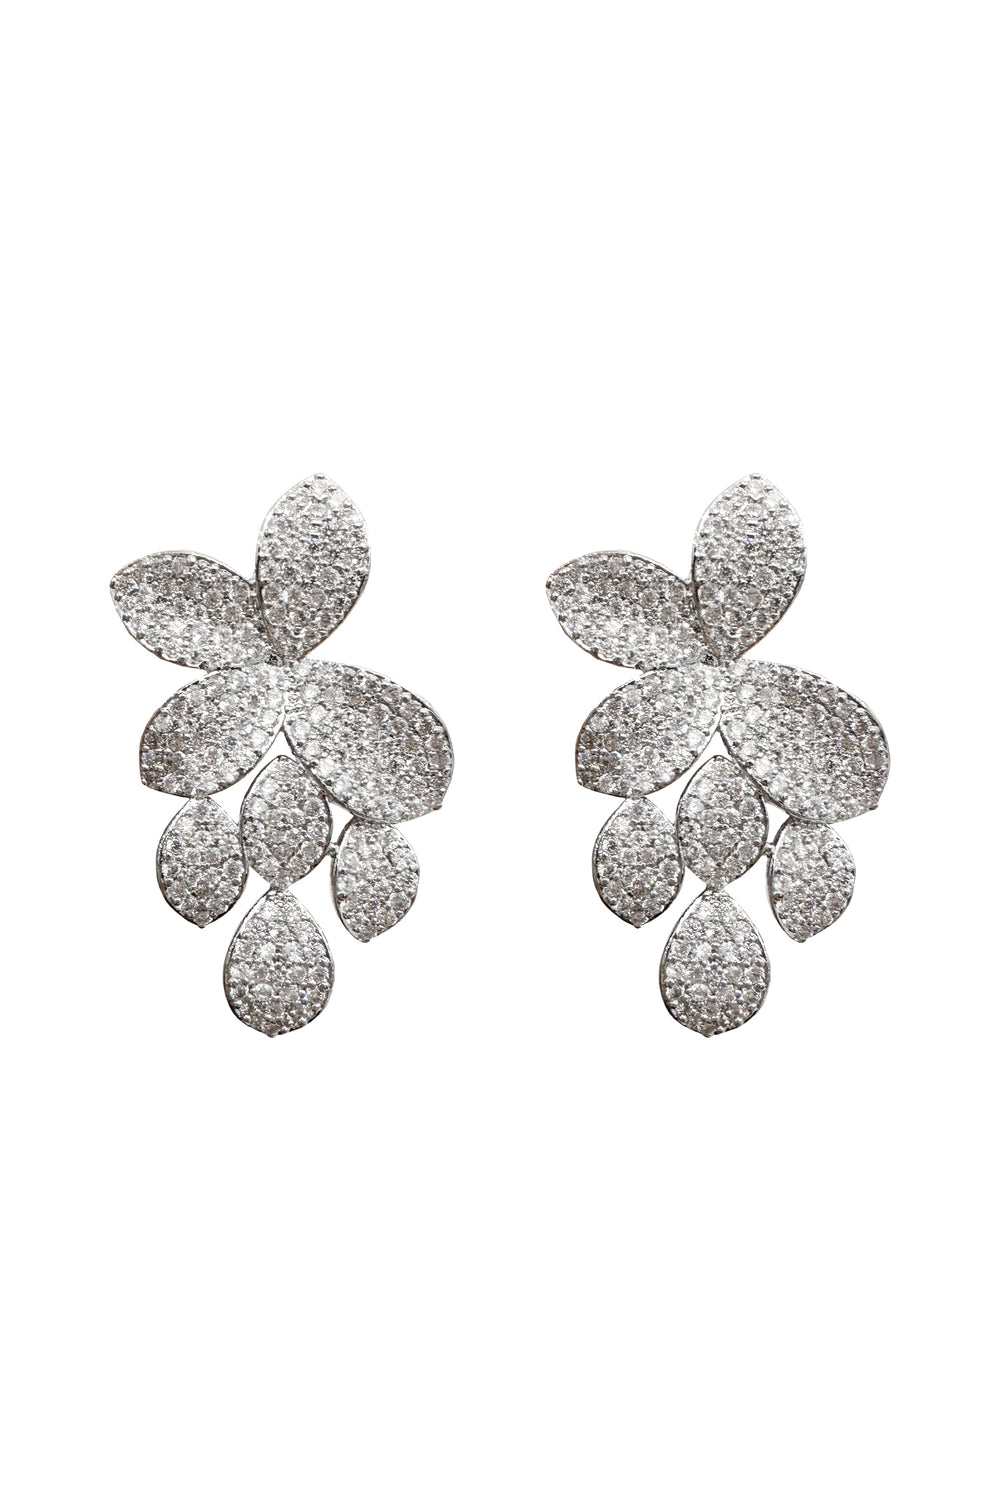 Silver flower earrings adorned with shimmering diamantes - a dazzling and elegant accessory to enhance your style with timeless sophistication.